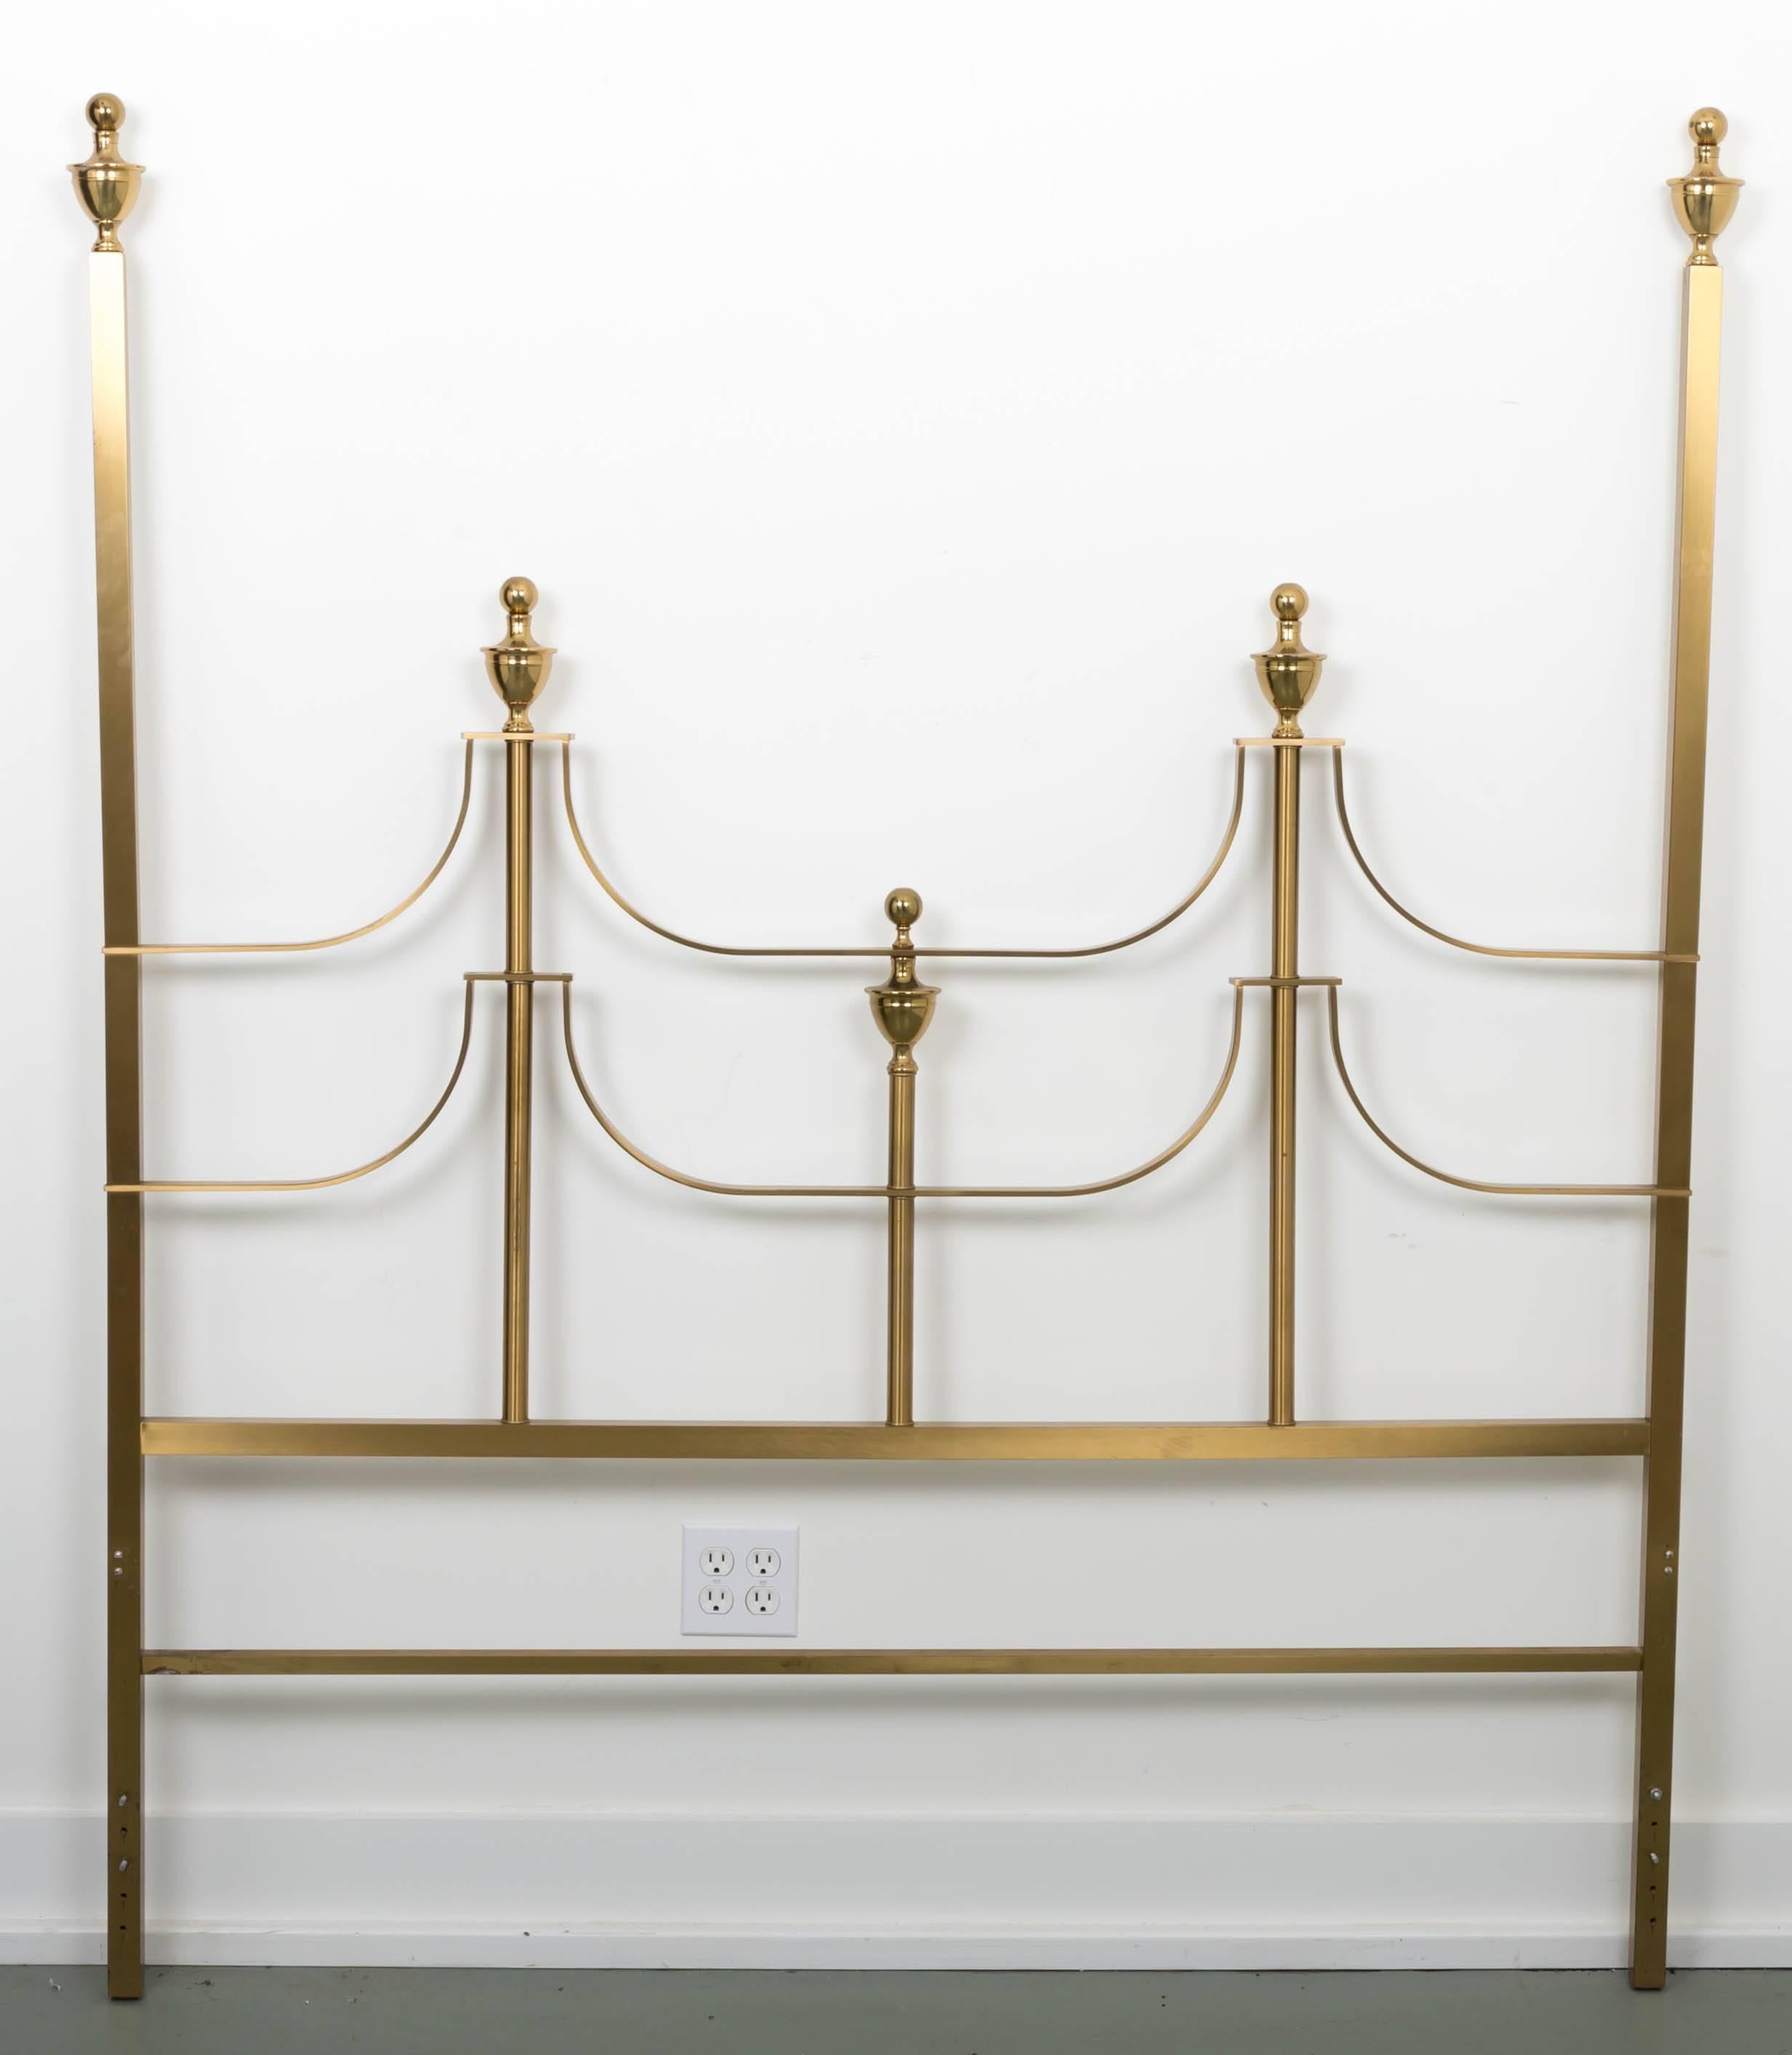 Full size brass headboard, the Hollywood Regency style. Finals shinny finish the rest in matte finish. Master Craft designed by William Doezema, later made by Baker furniture.